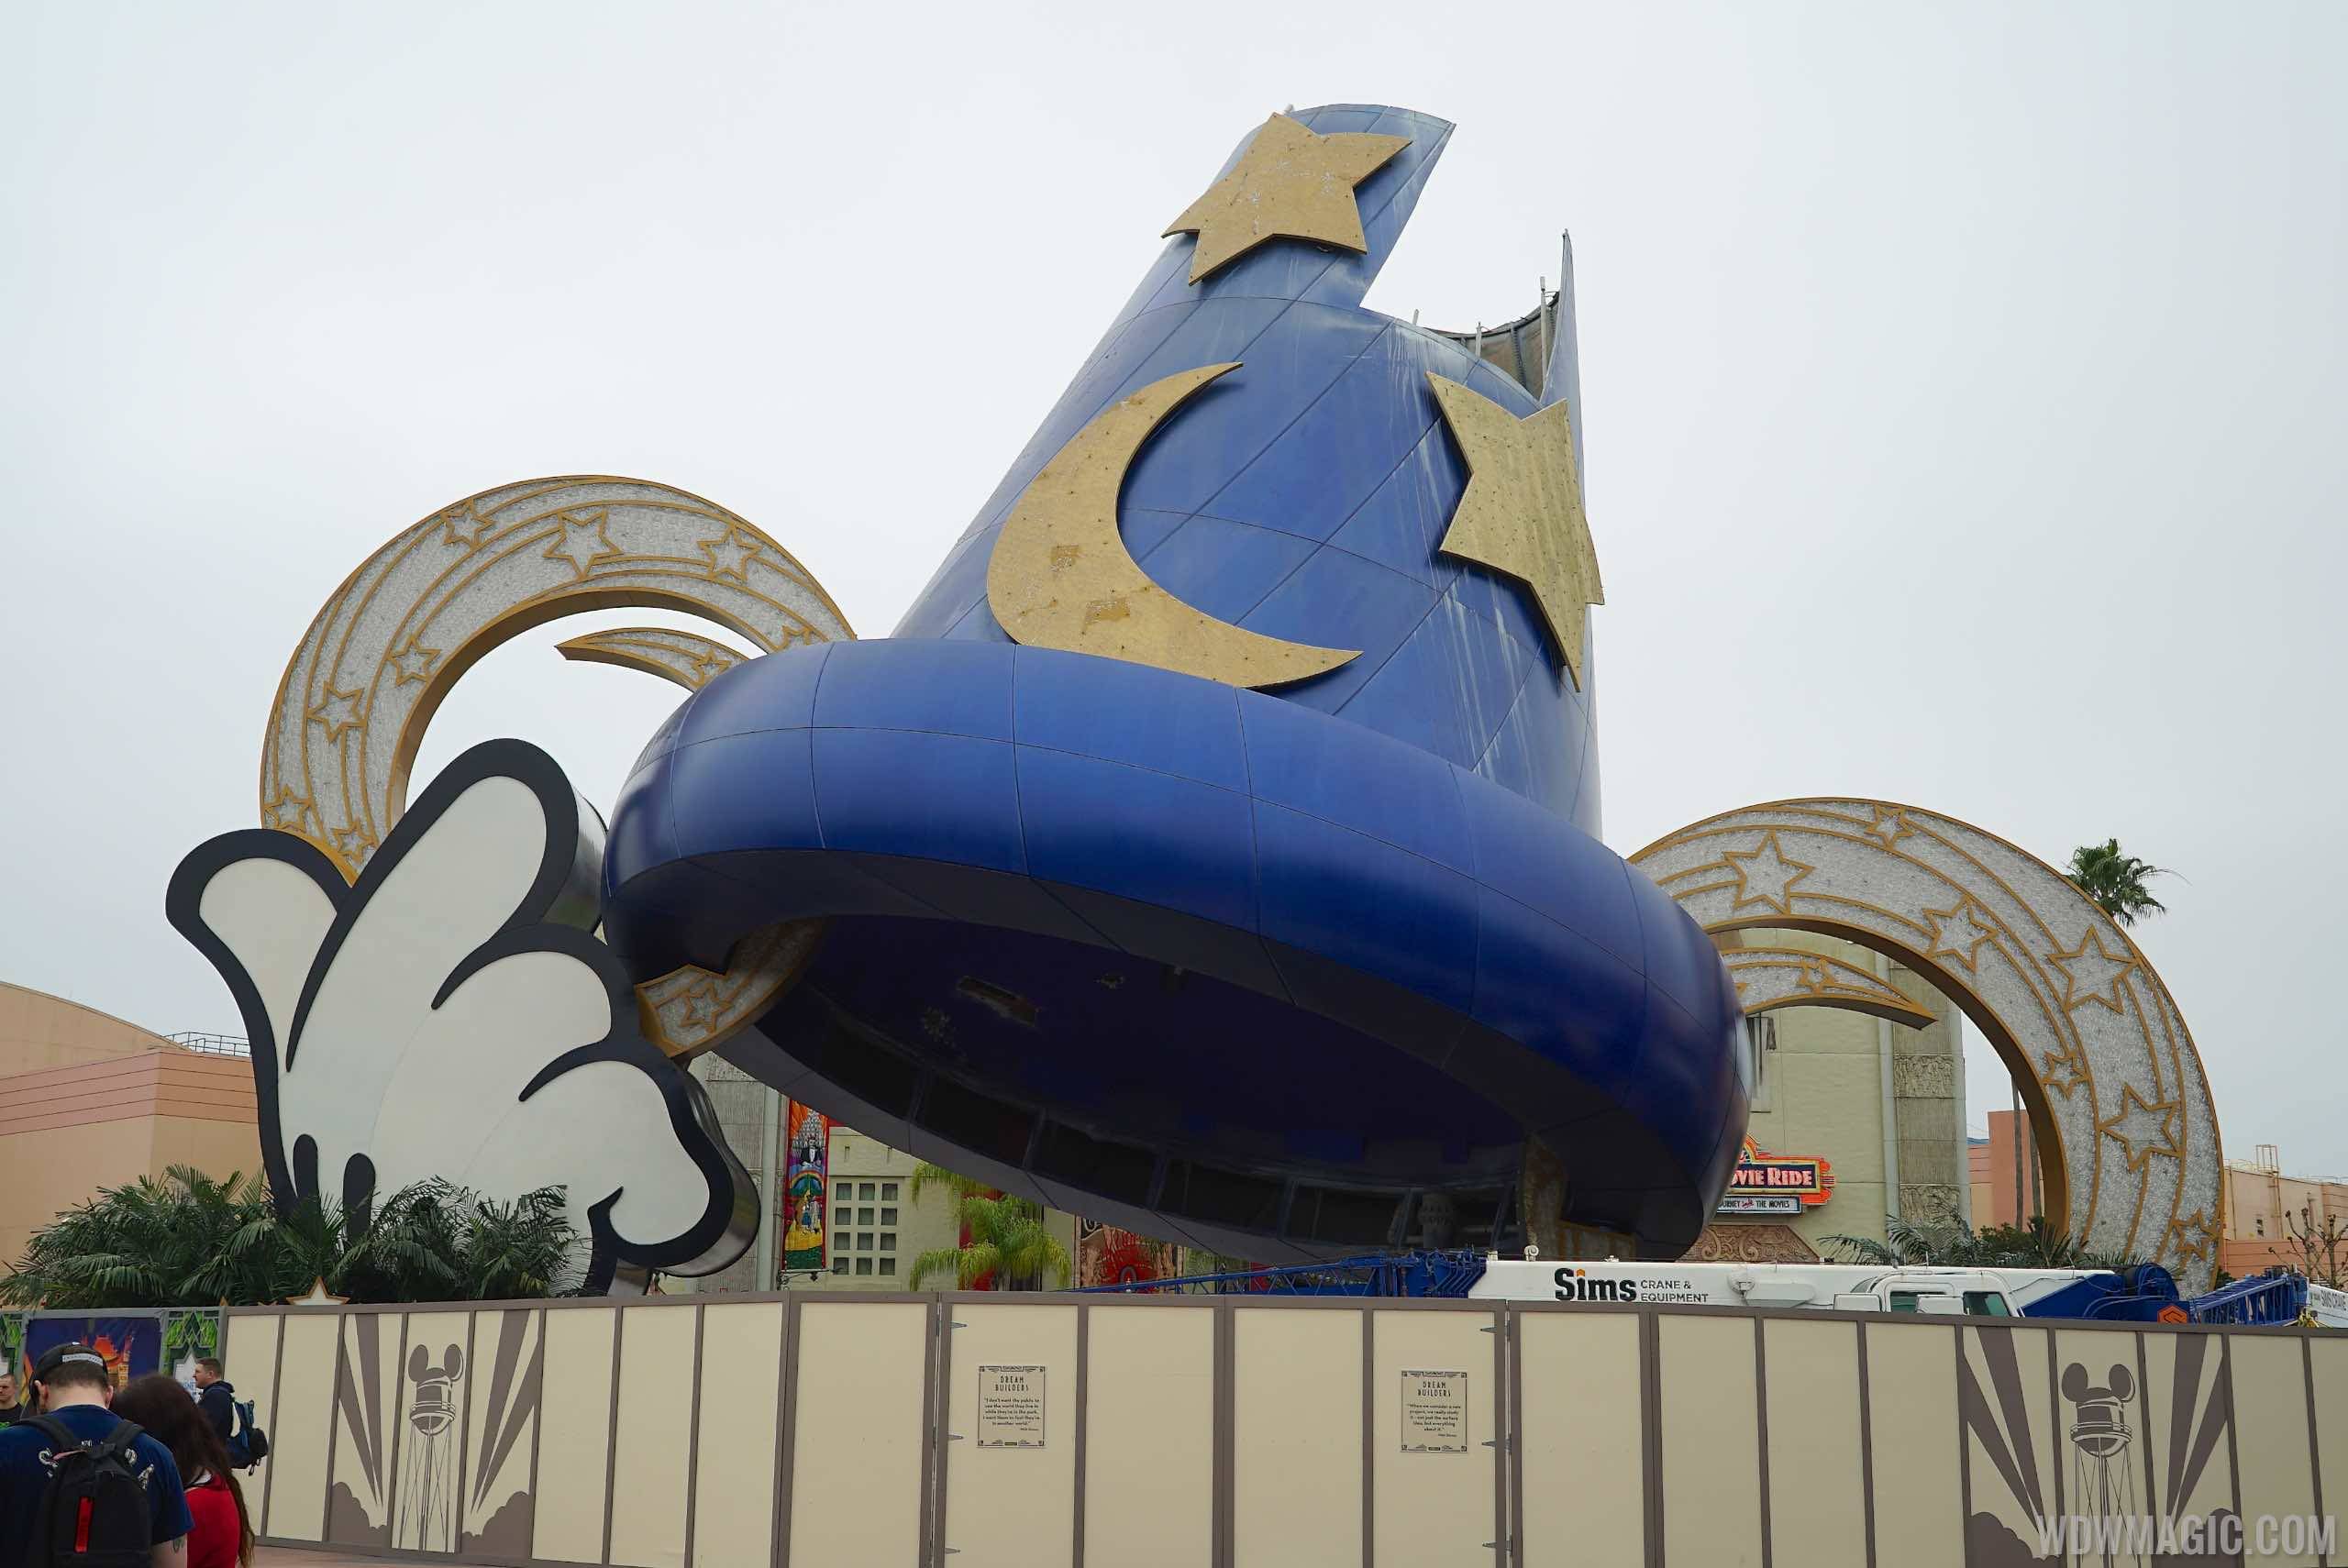 PHOTOS - Latest look at the Sorcerer Mickey Hat icon demolition at Disney's Hollywood Studios